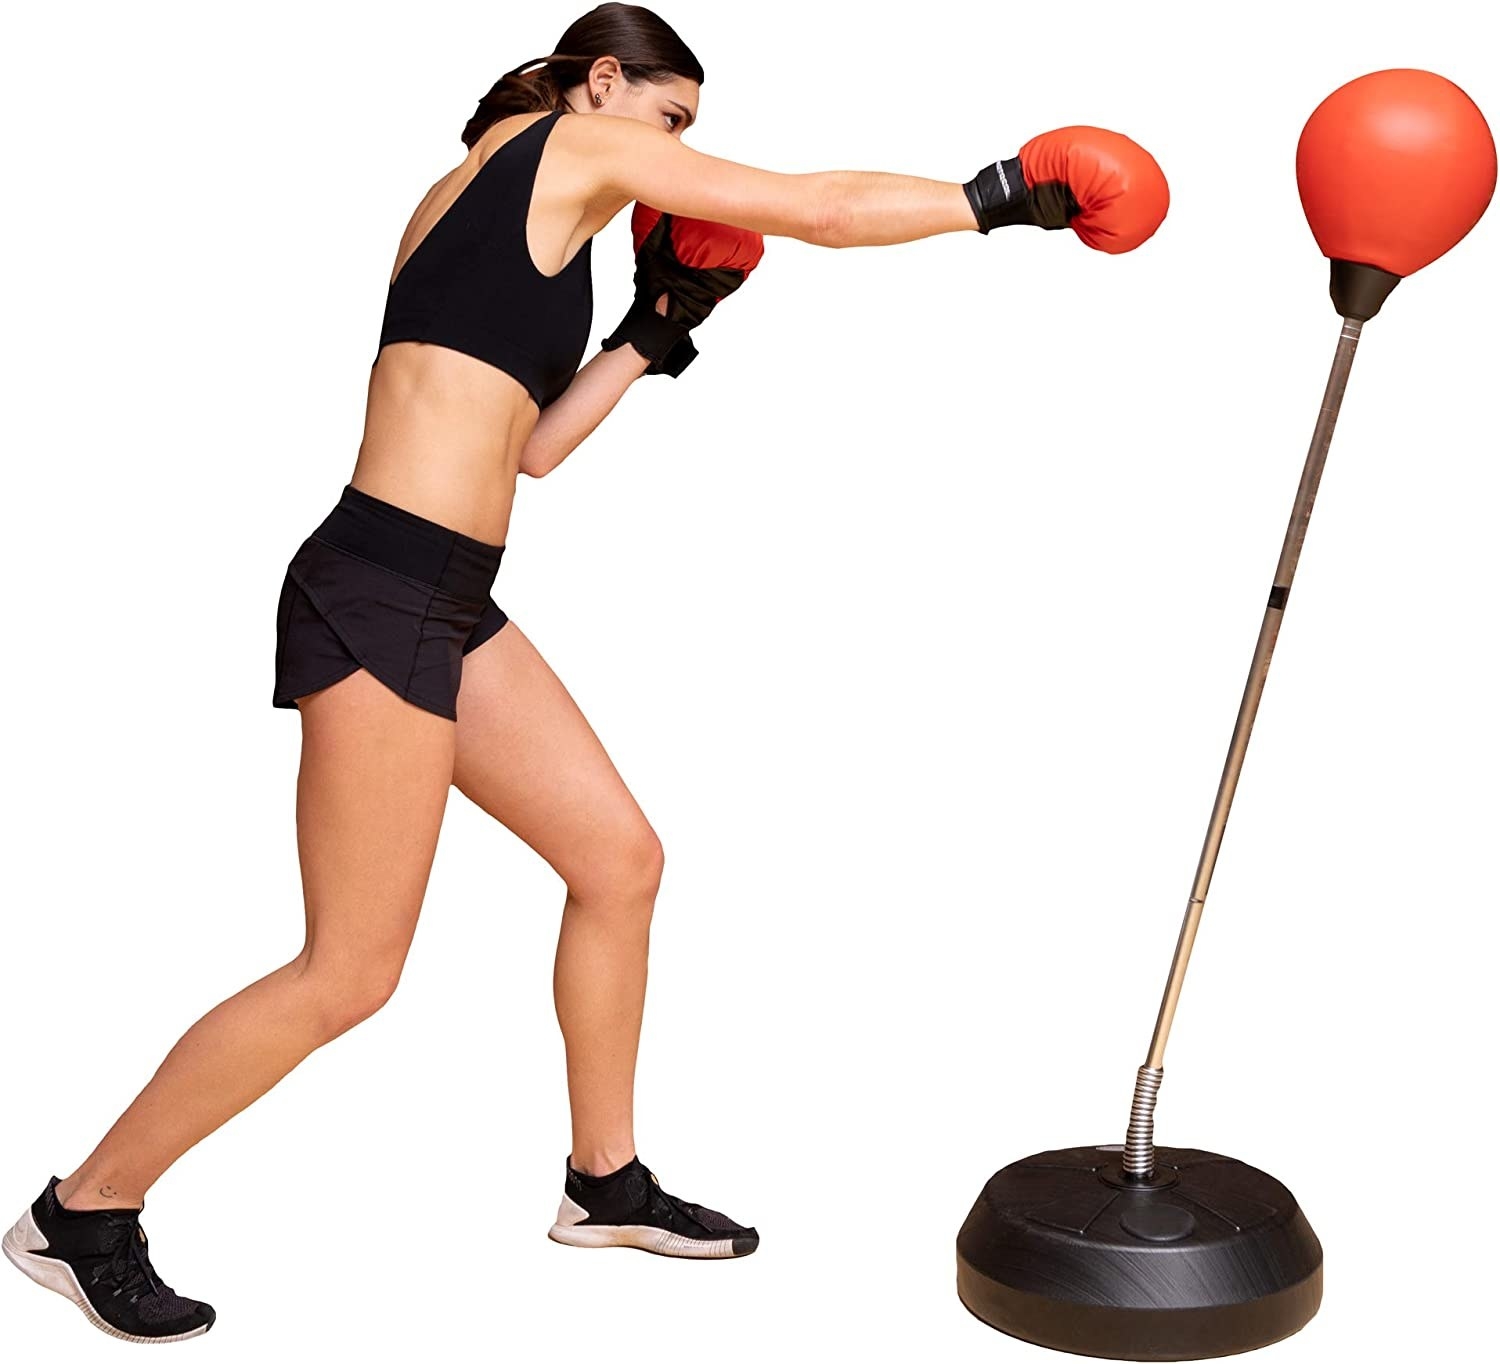 Model boxing with a red punching bag stand